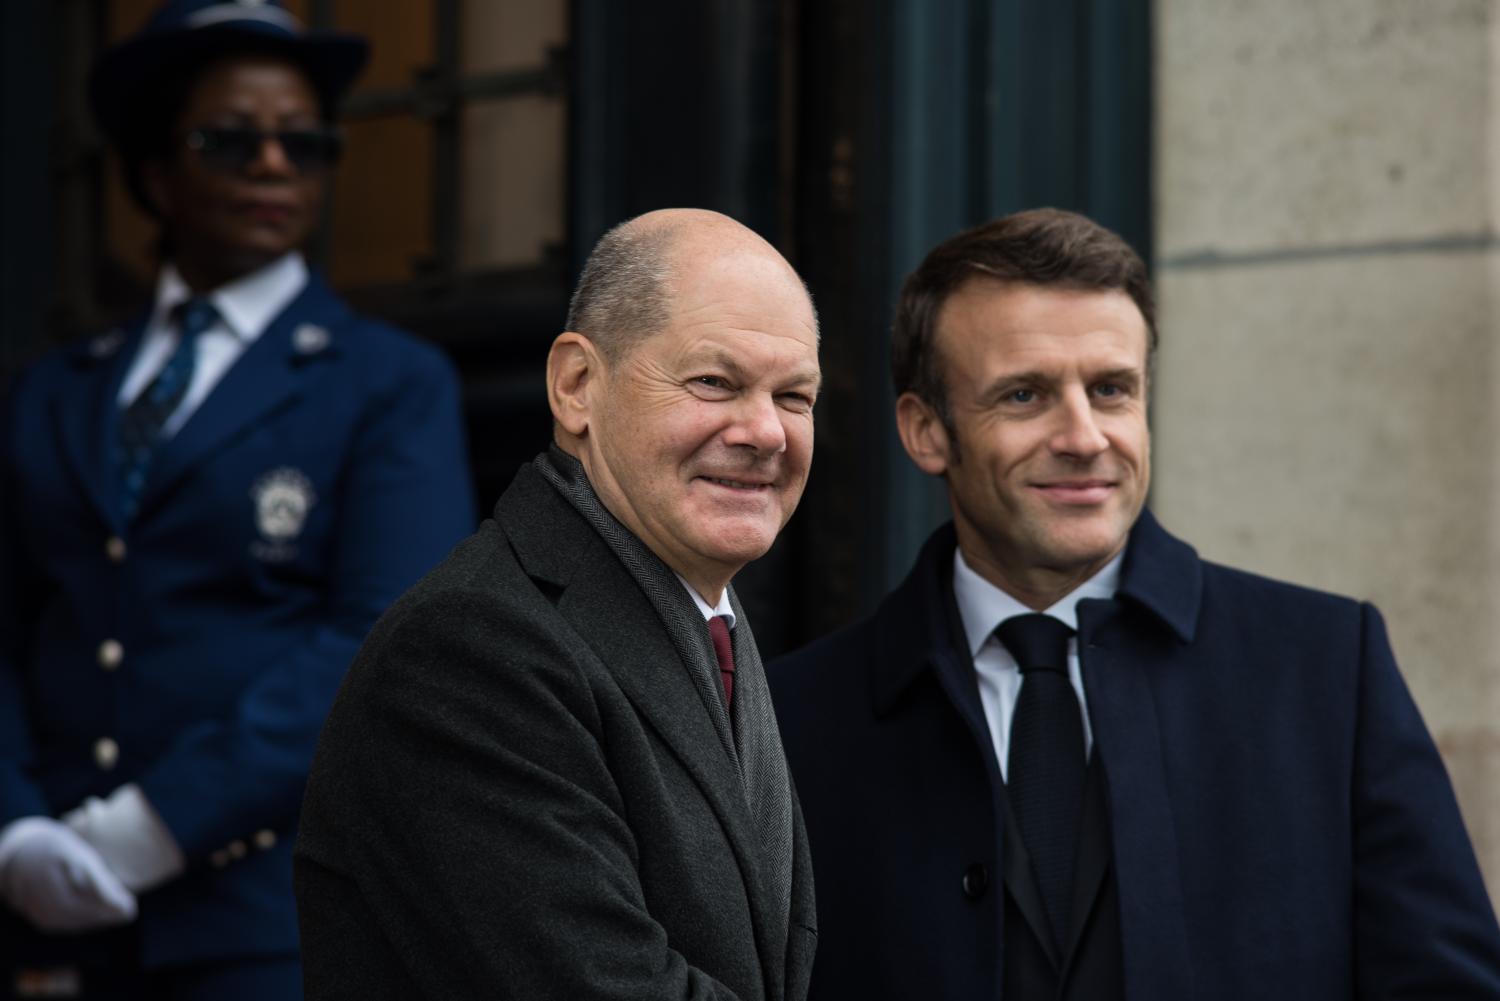 German Chancellor Olaf Scholz and French President Emmanuel Macron at the entrance of the Sorbonne during the Franco-German summit for the 60th anniversary of the Elysee Treaty, in Paris, 22 January, 2023. (Photo by Andrea Savorani Neri/NurPhoto)NO USE FRANCE